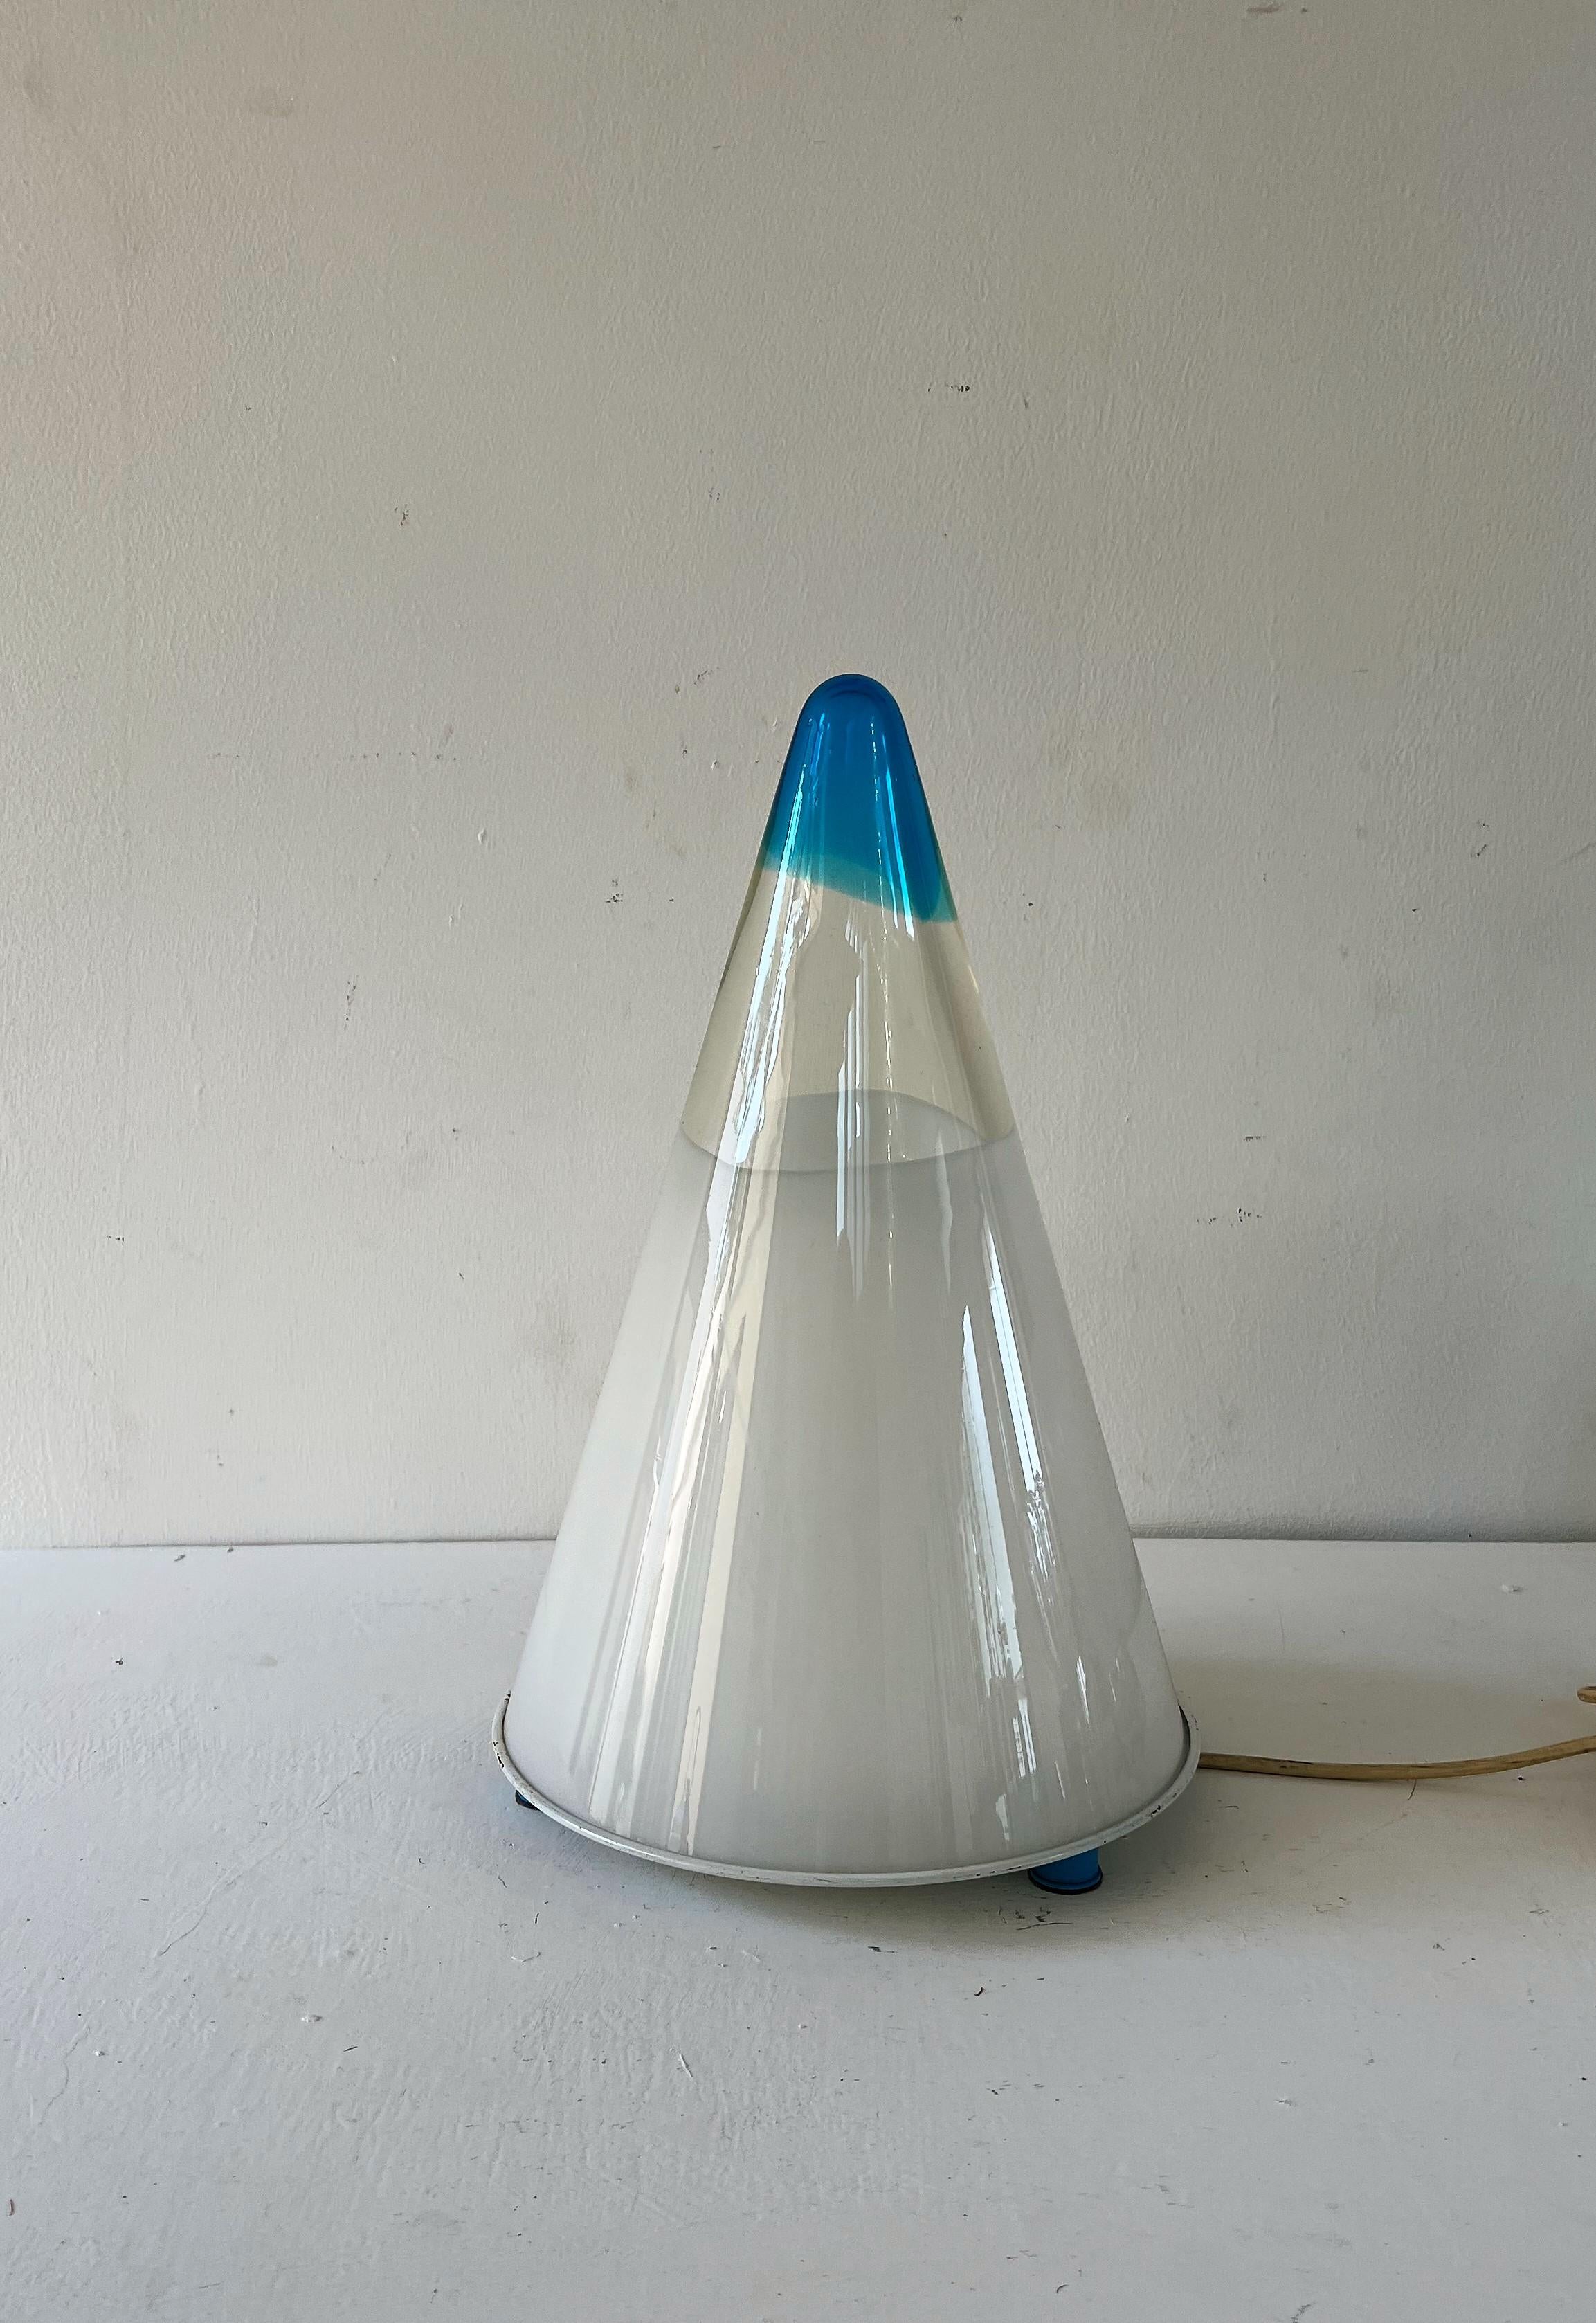 Beautiful lamp from the Space Age era in the shape of a cone.
The Murano glass shade is manufactured in white, blue and clear.
The metal base is lacquered in white and blue.
Lamp holds one e27 bulb.